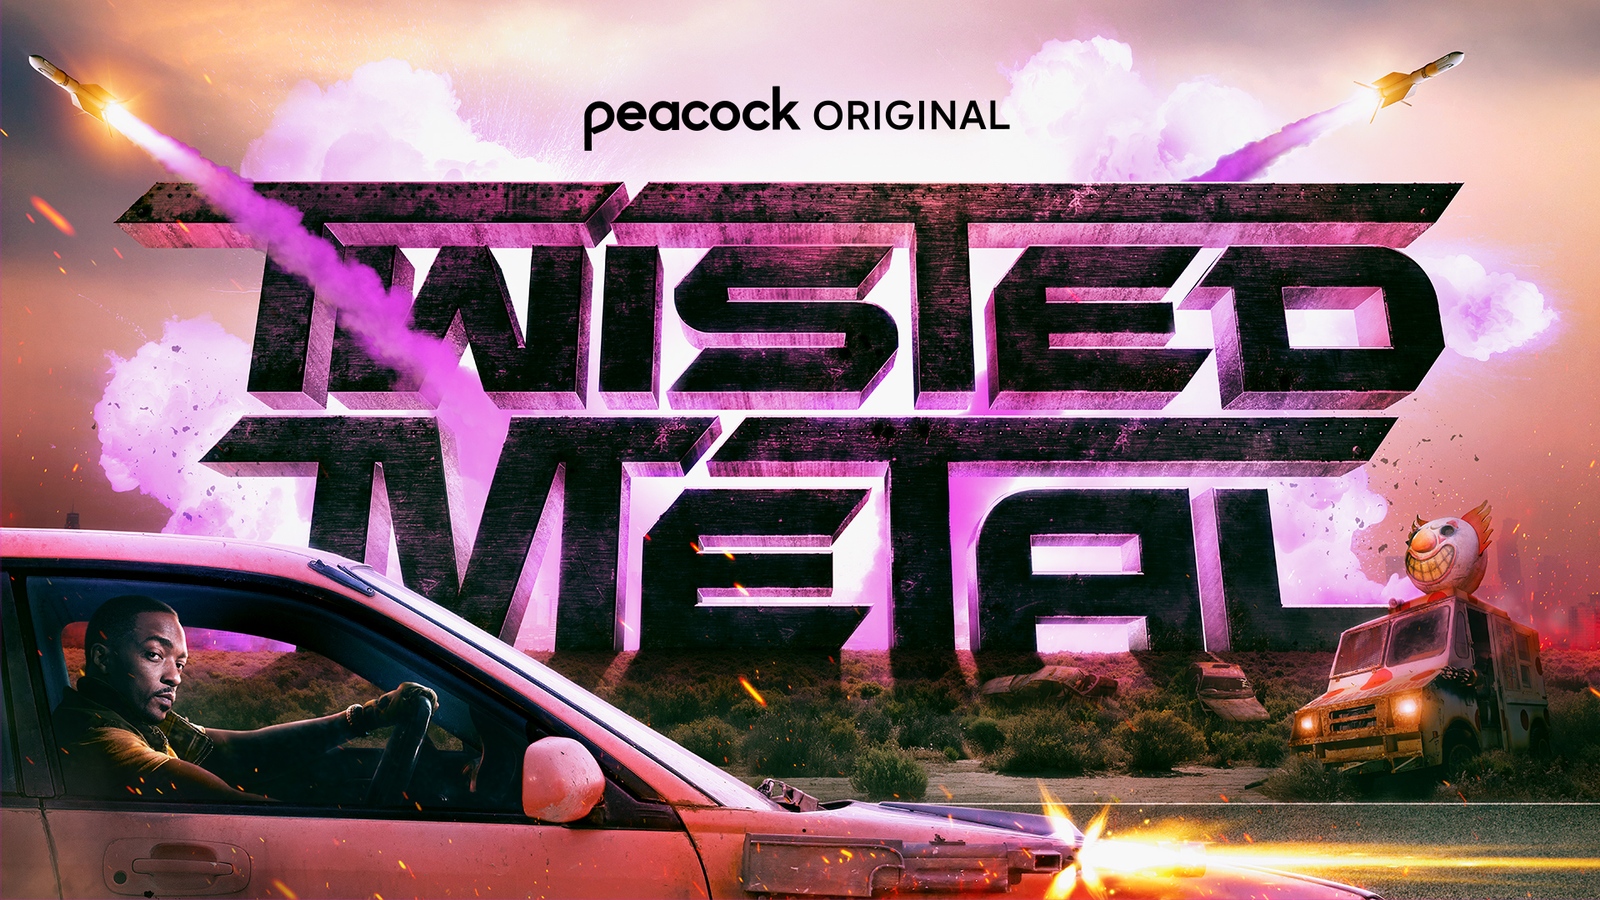 Peacock Twisted Metal series full cast details